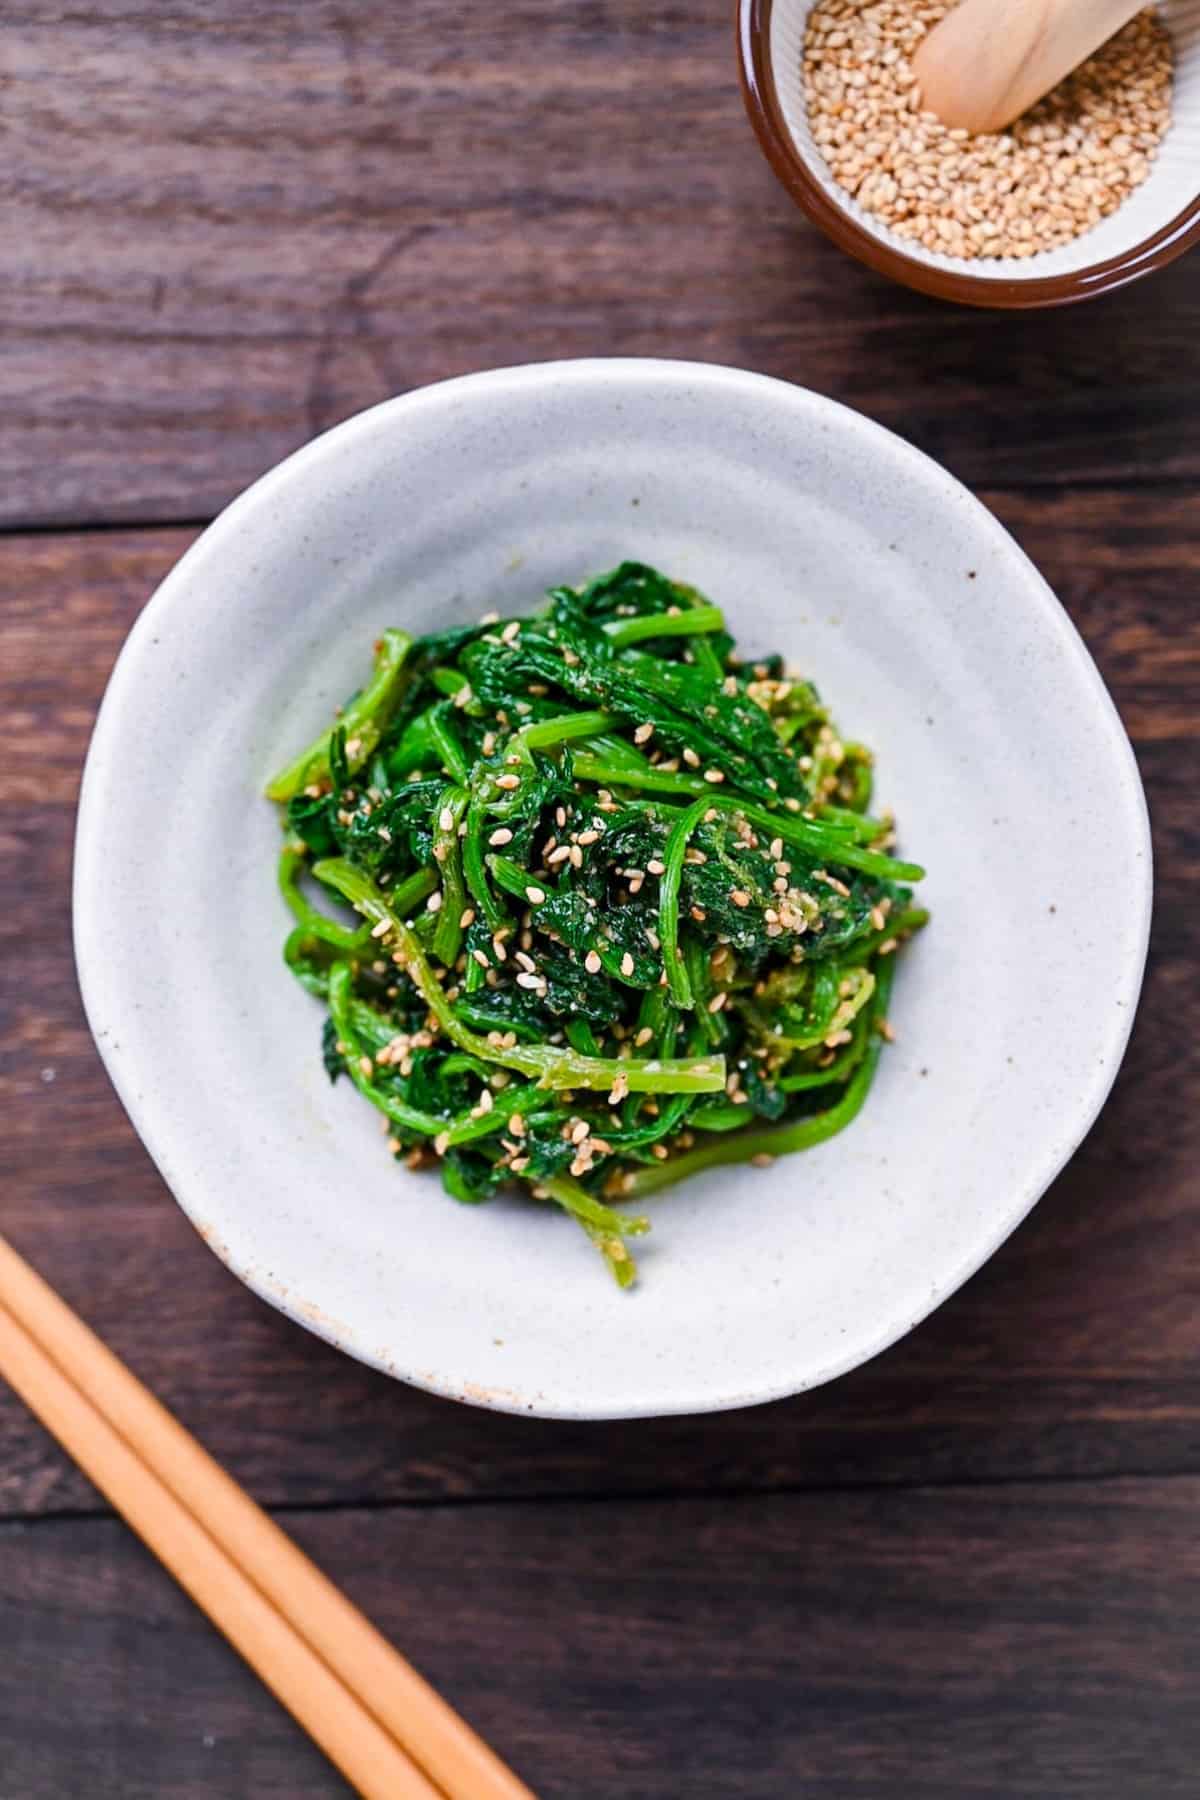 Japanese sesame spinach salad (horenso no goma-ae) on a white plate on a wooden surface